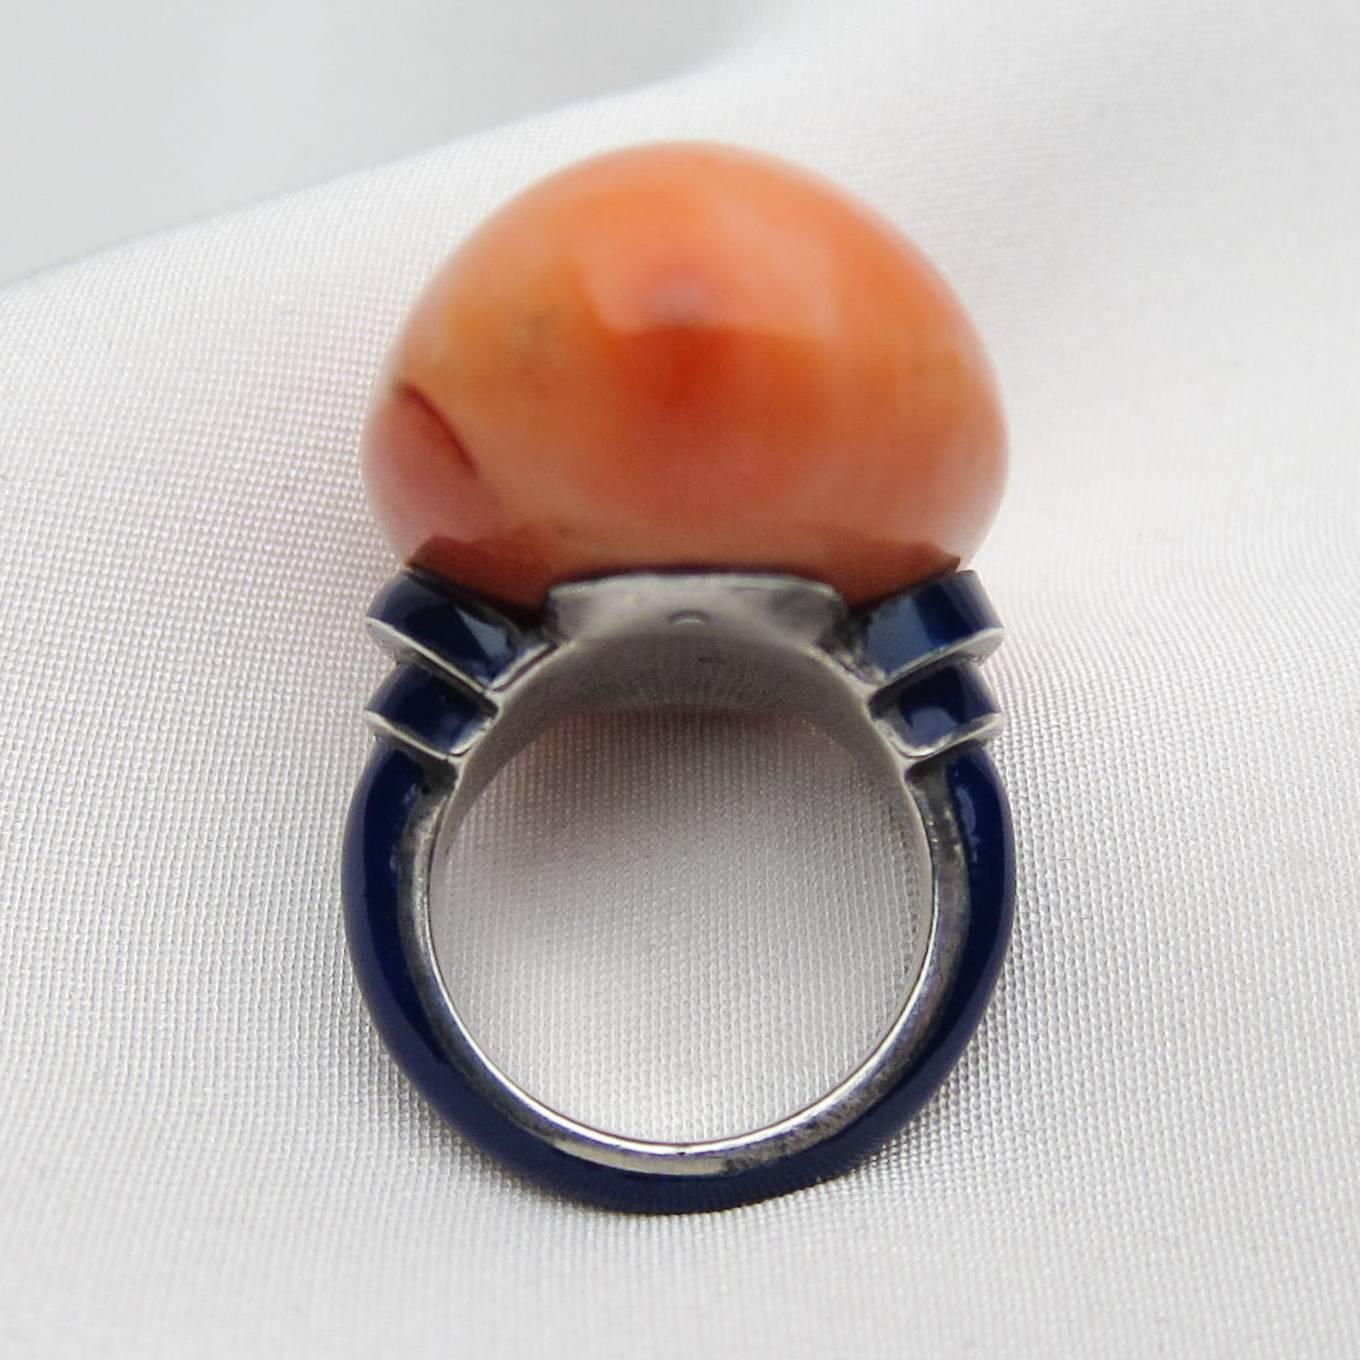 Art Nouveau 85 Carat Orange Coral Cabochon and Blue Enamel Cocktail Ring In Excellent Condition For Sale In Seattle, WA